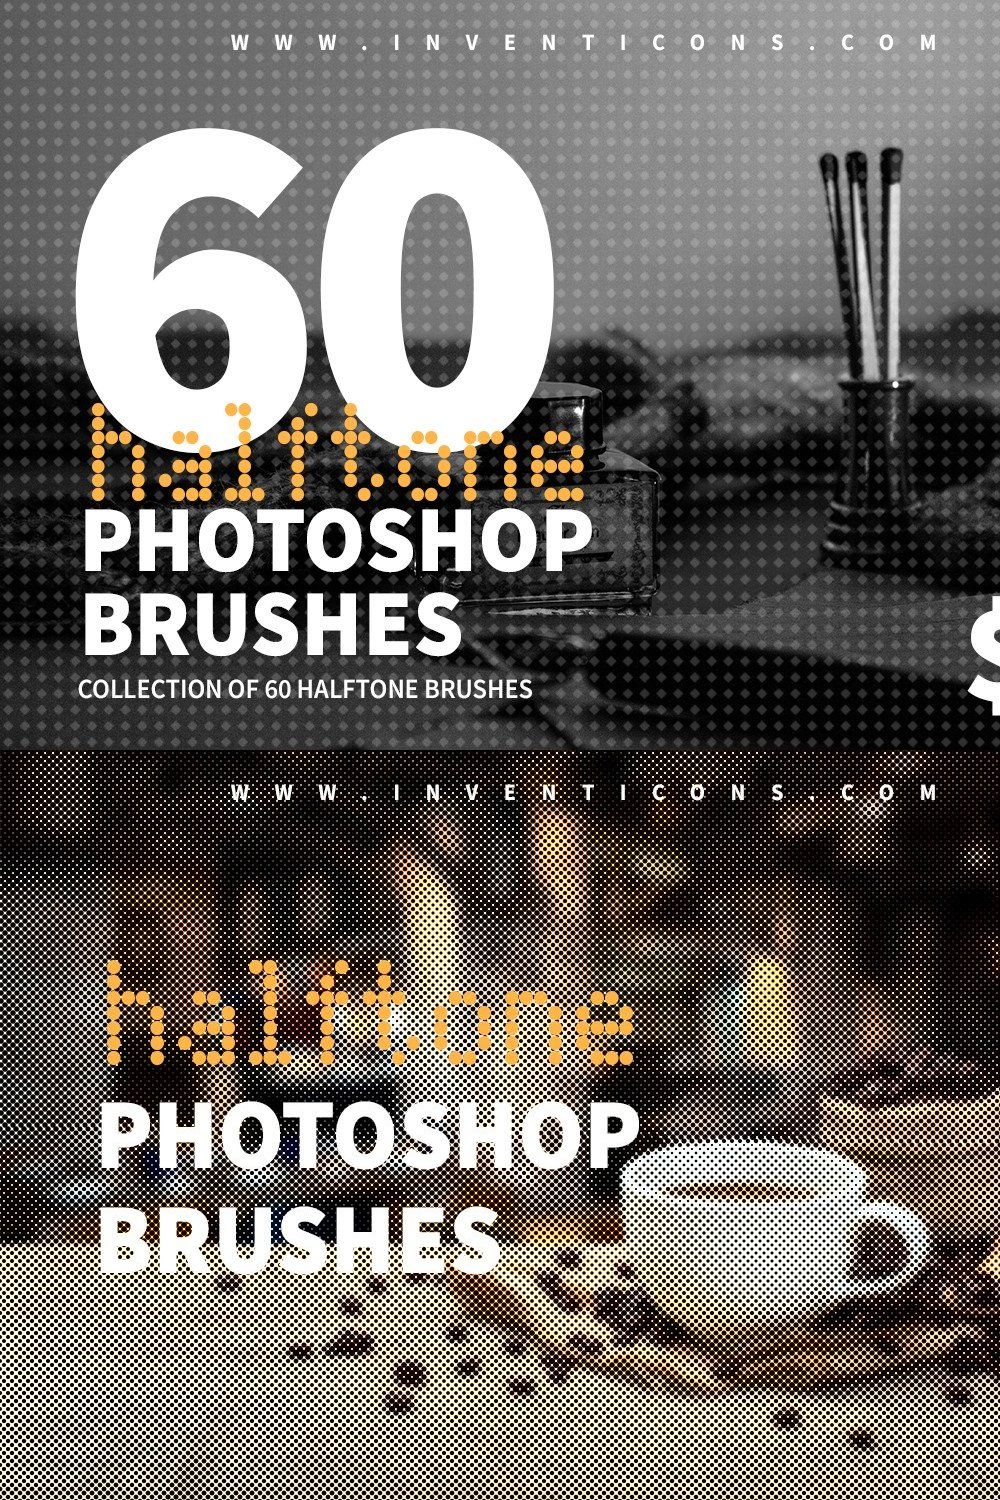 60 Halftone Photoshop Brushes pinterest preview image.